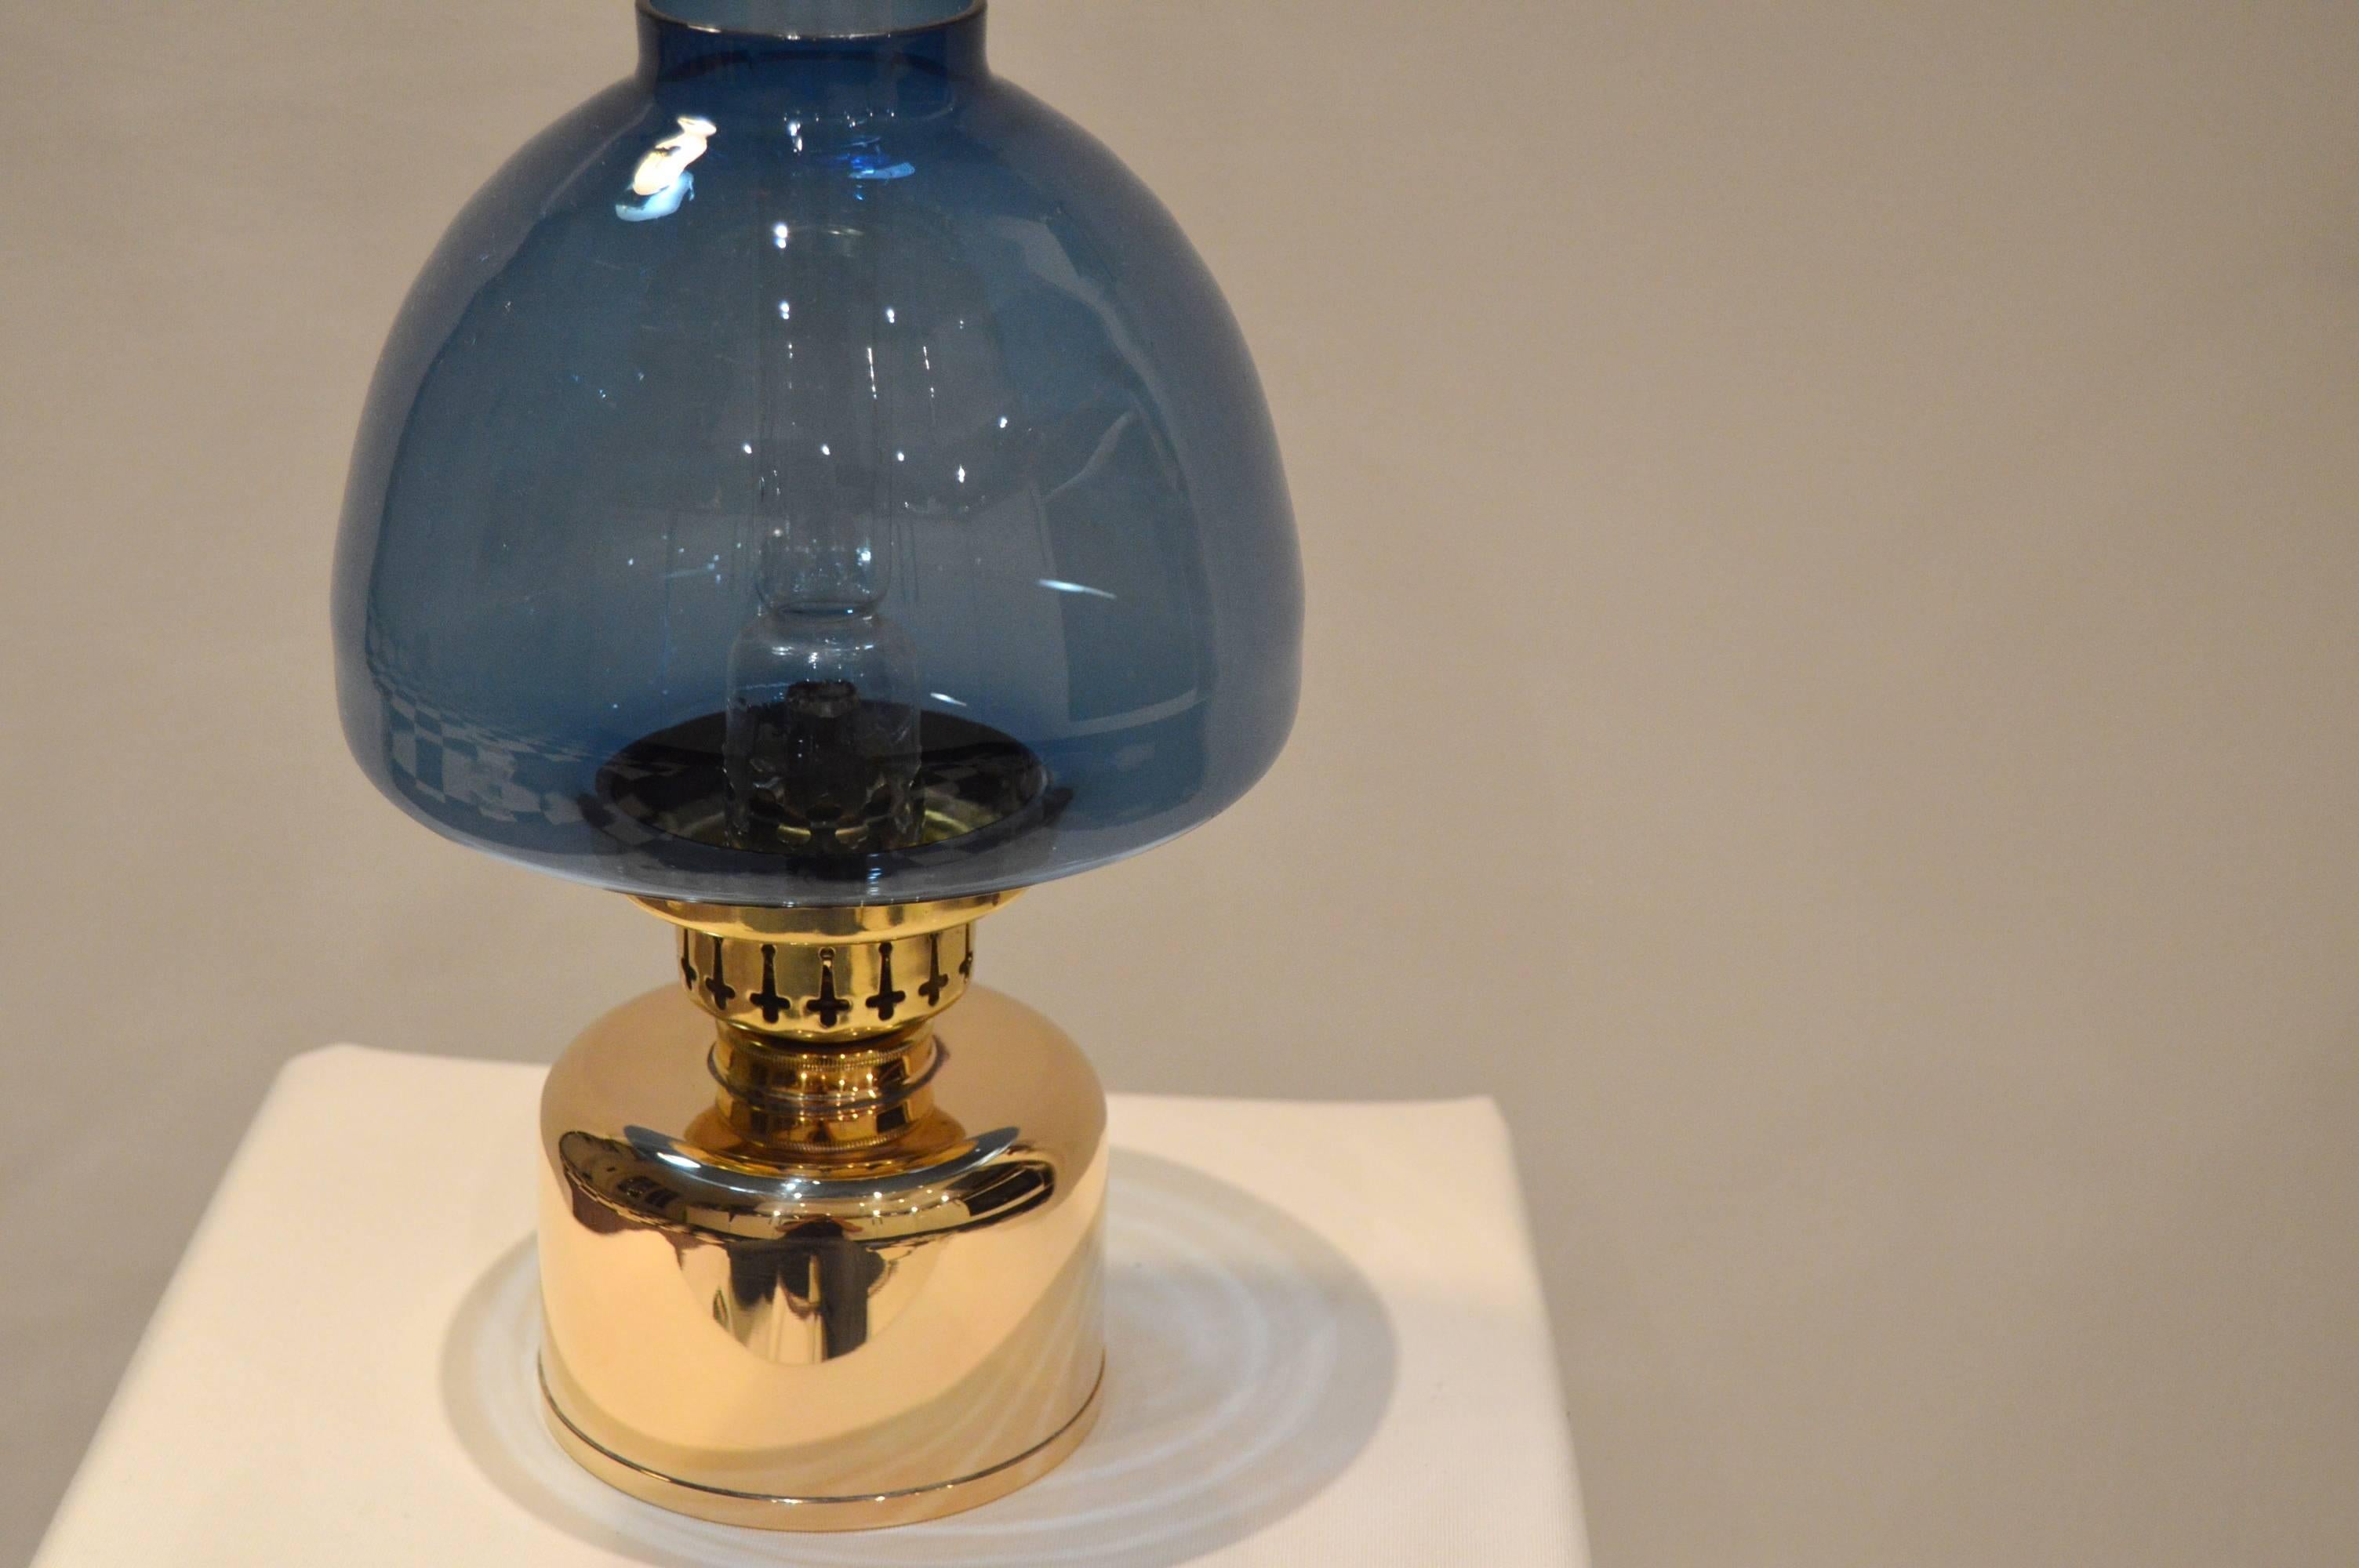 Elegant and rare kerosene lamp, even called oil lamp. Designed by Hans-Agne Jakobsson for his own company Hans-Agne Jakobsson AB in Markaryd Sweden.

- Blue glass and brass
- Patina on the brass
- The height below is given including the burner